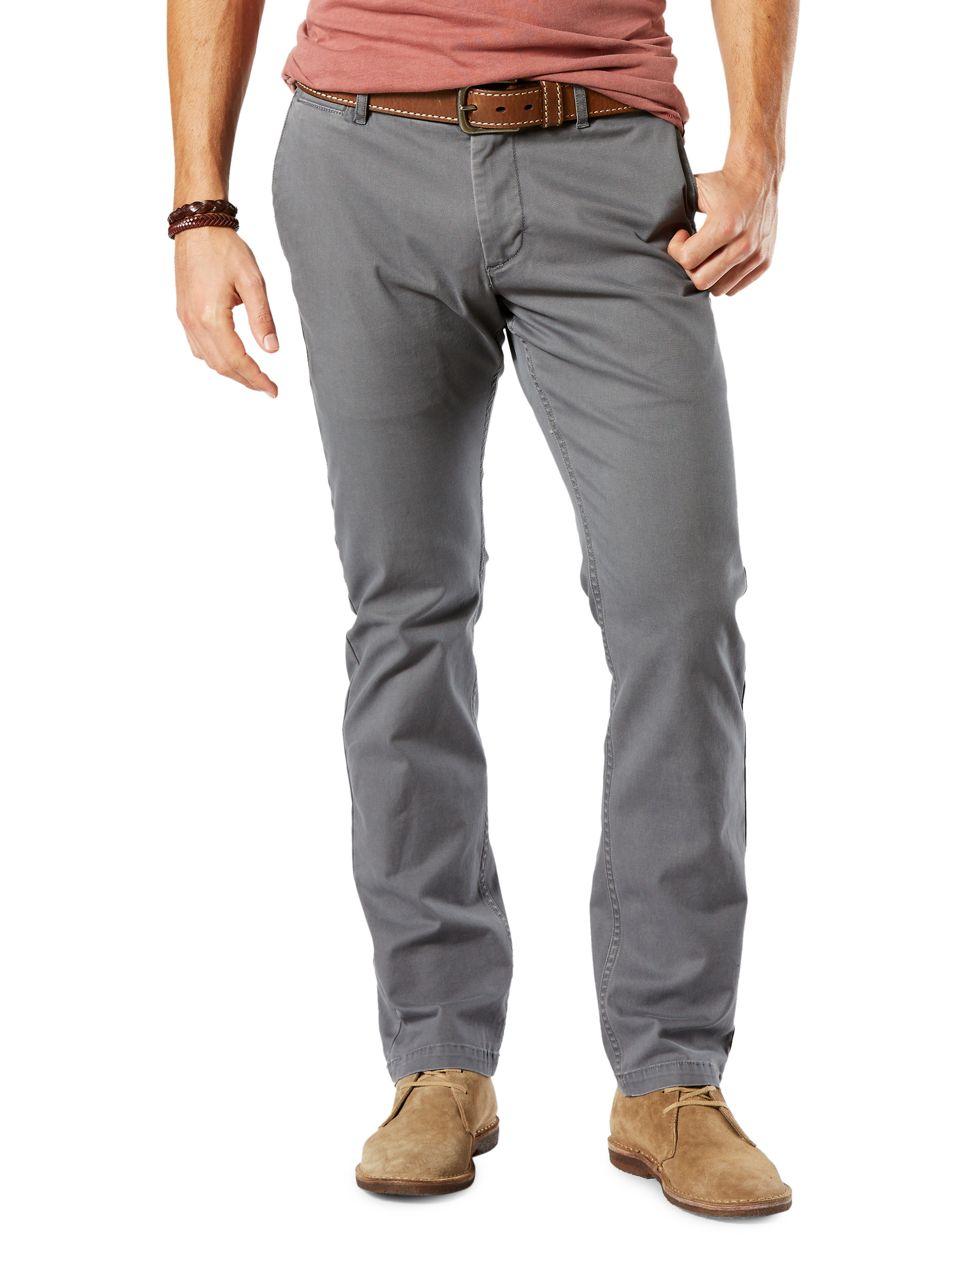 Lyst - Dockers Slim Tapered-fit Cotton-blend Pants in Gray for Men